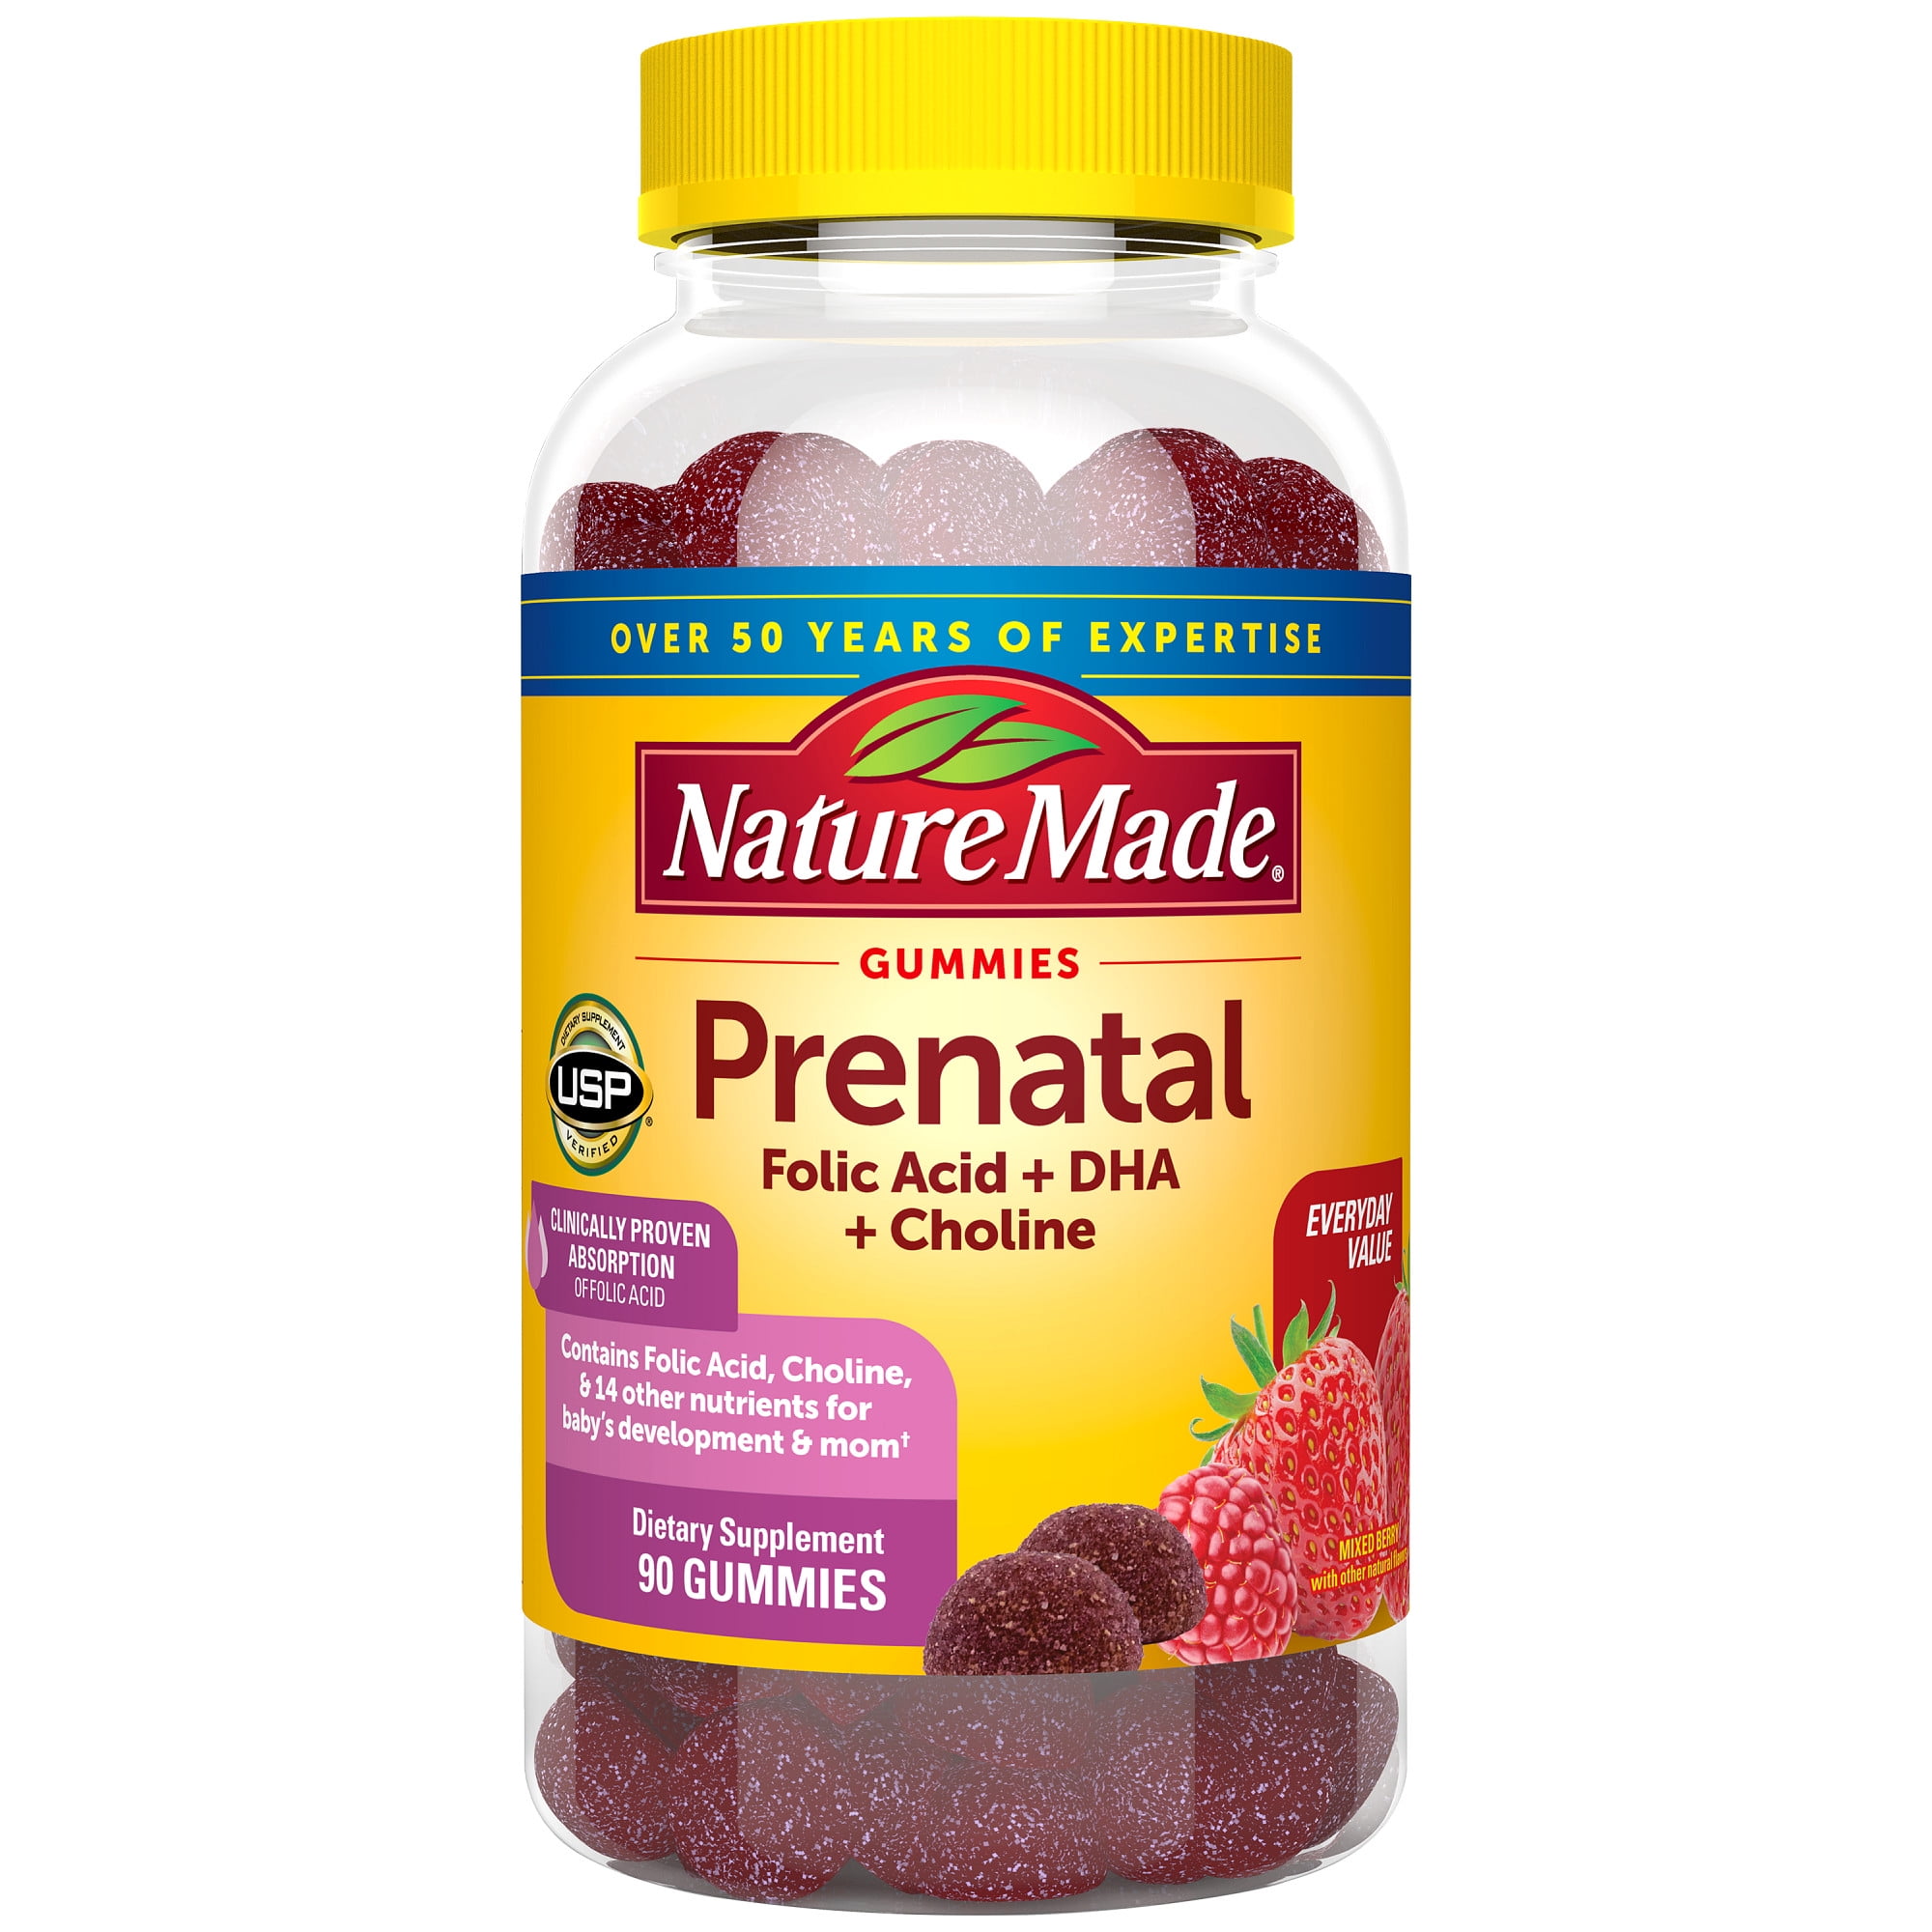 Nature Made Prenatal Gummies with DHA and Folic Acid, Dietary Supplement, Prenatal Health, 90 Count